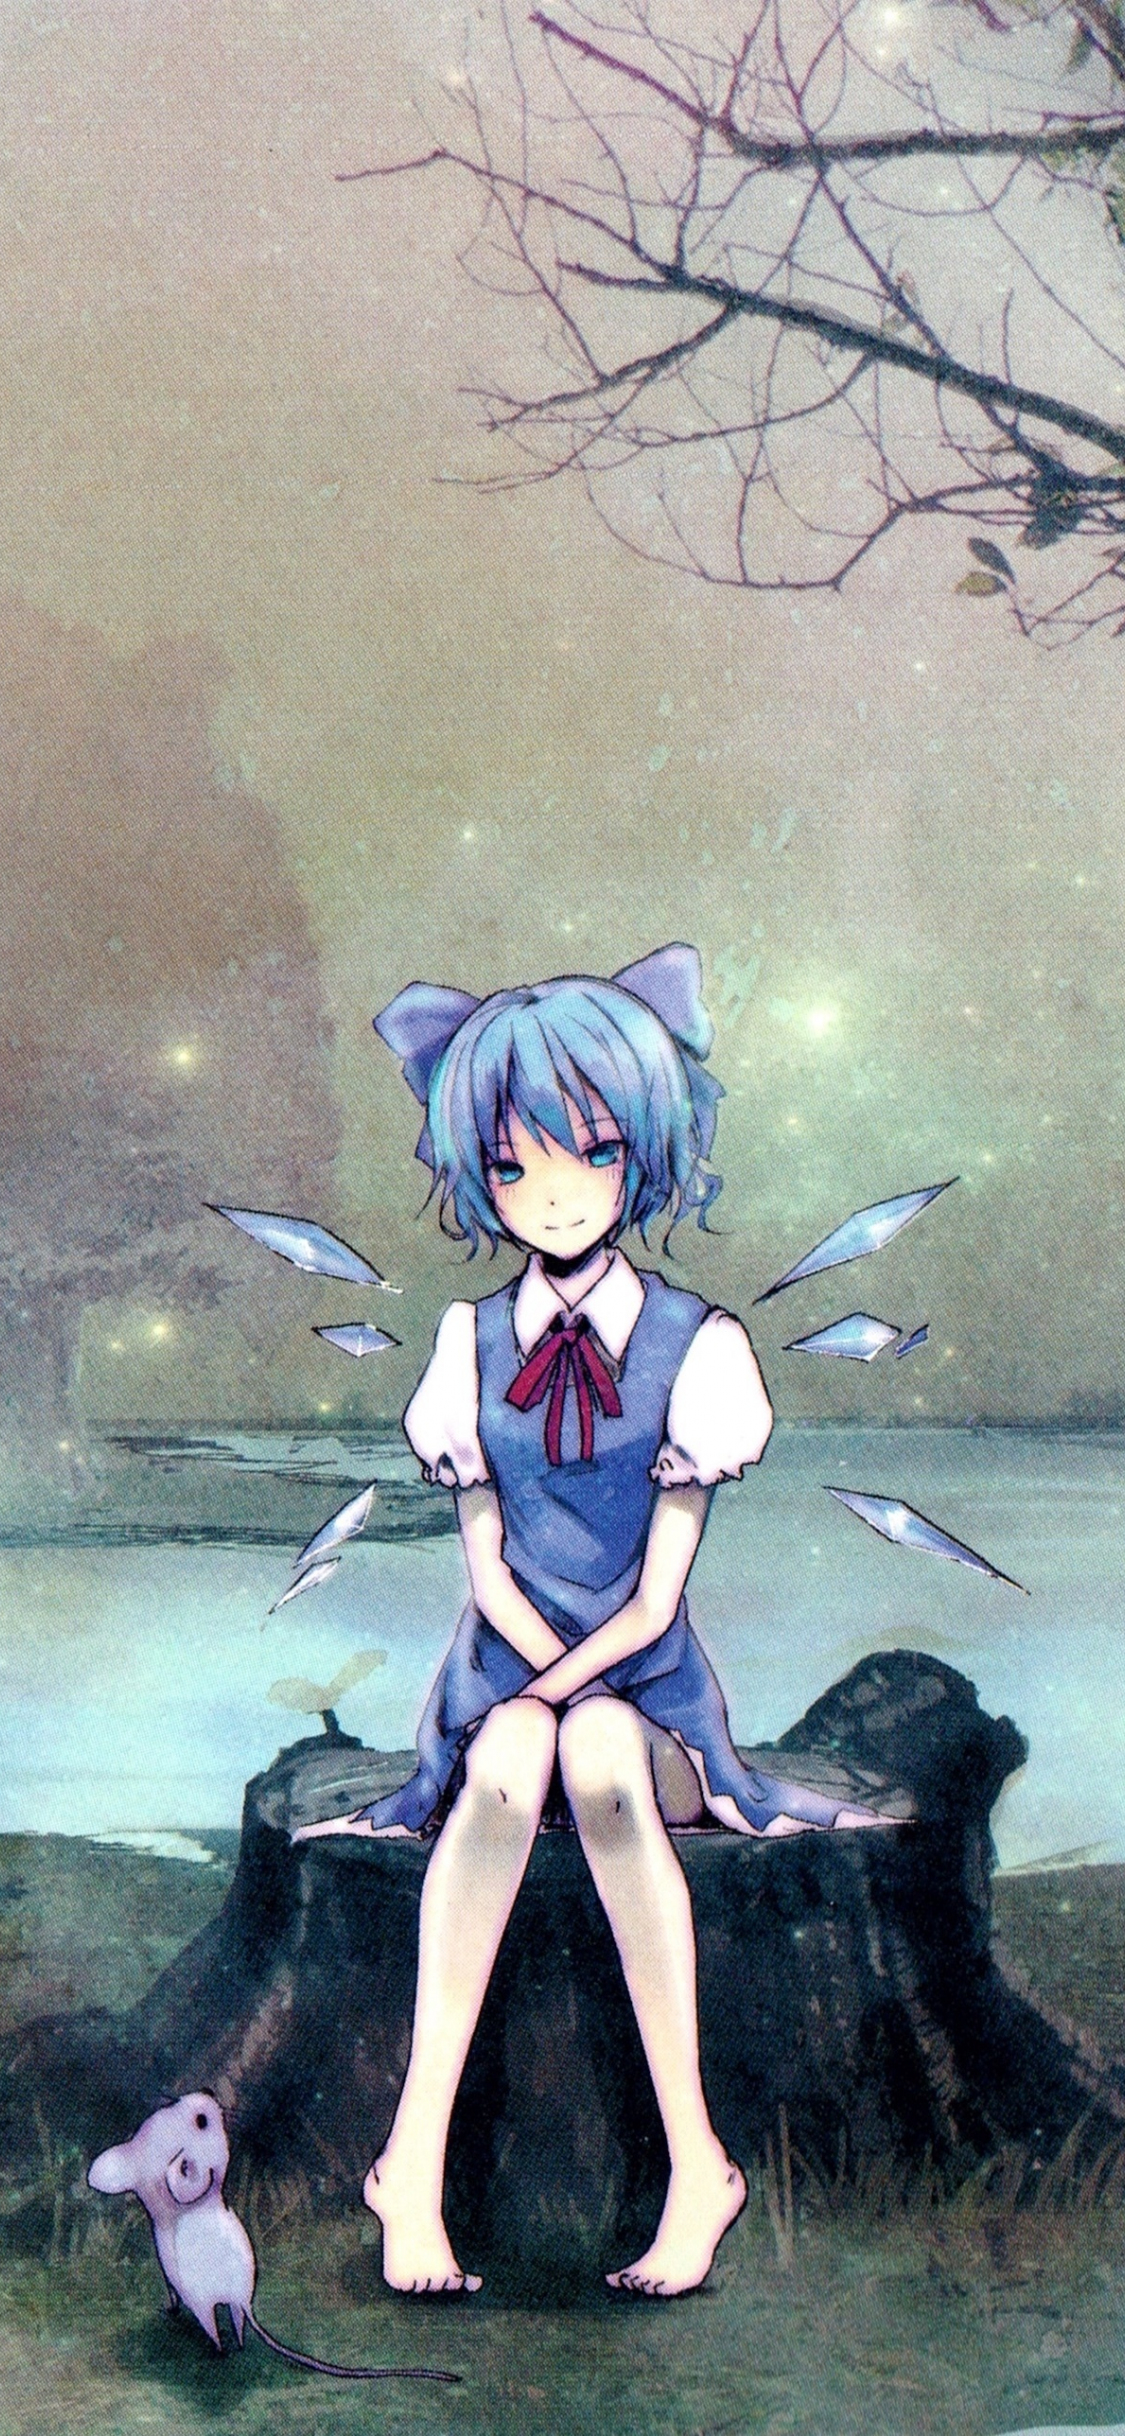 Download Cirno Touhou Anime Girl Sit Outdoor 1125x2436 Wallpaper Iphone X 1125x2436 Hd Image Background 7048